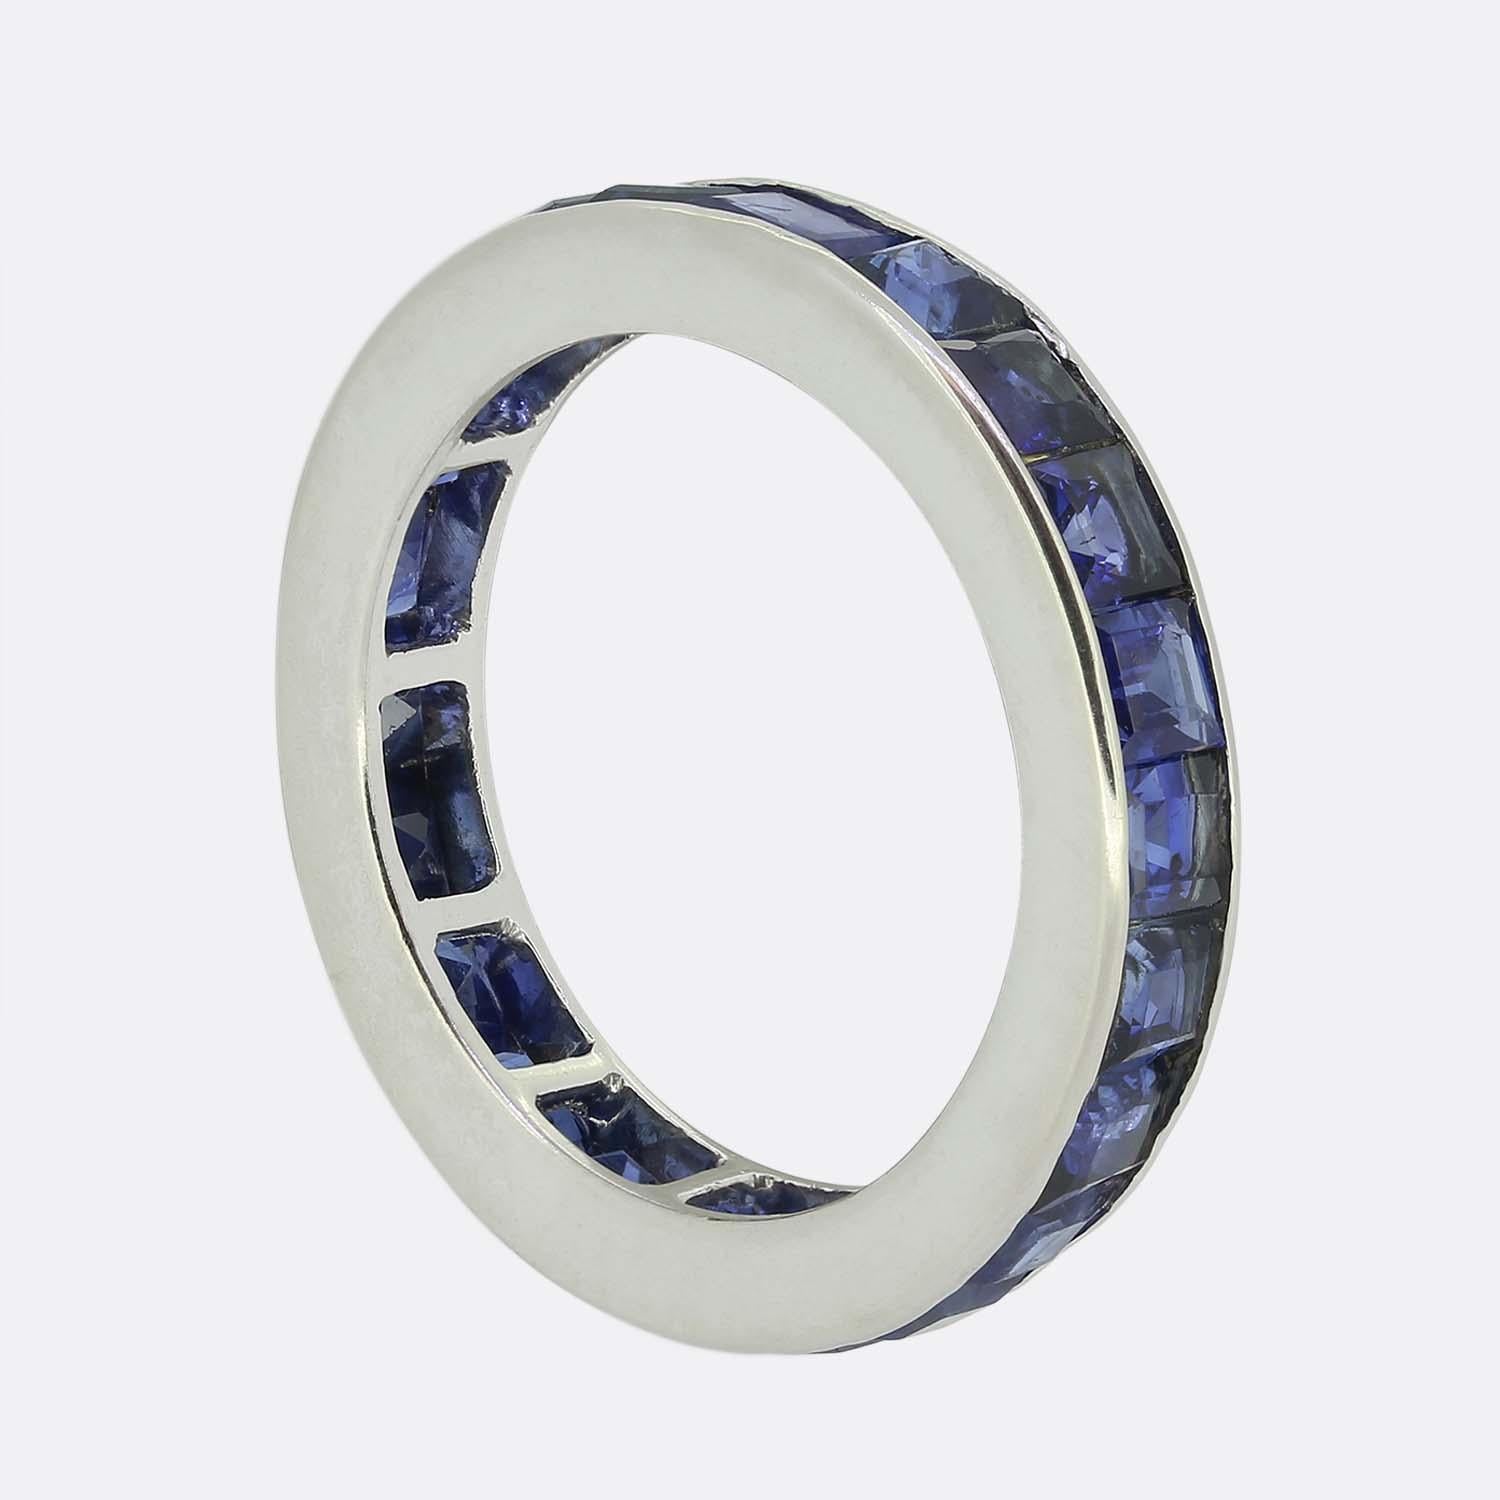 Here we have a marvellous full-eternity ring taken from a time when the Art Deco style was continuing to revolutionise the world of design. This piece has been crafted from platinum with the band playing host to 22 perfectly matched square